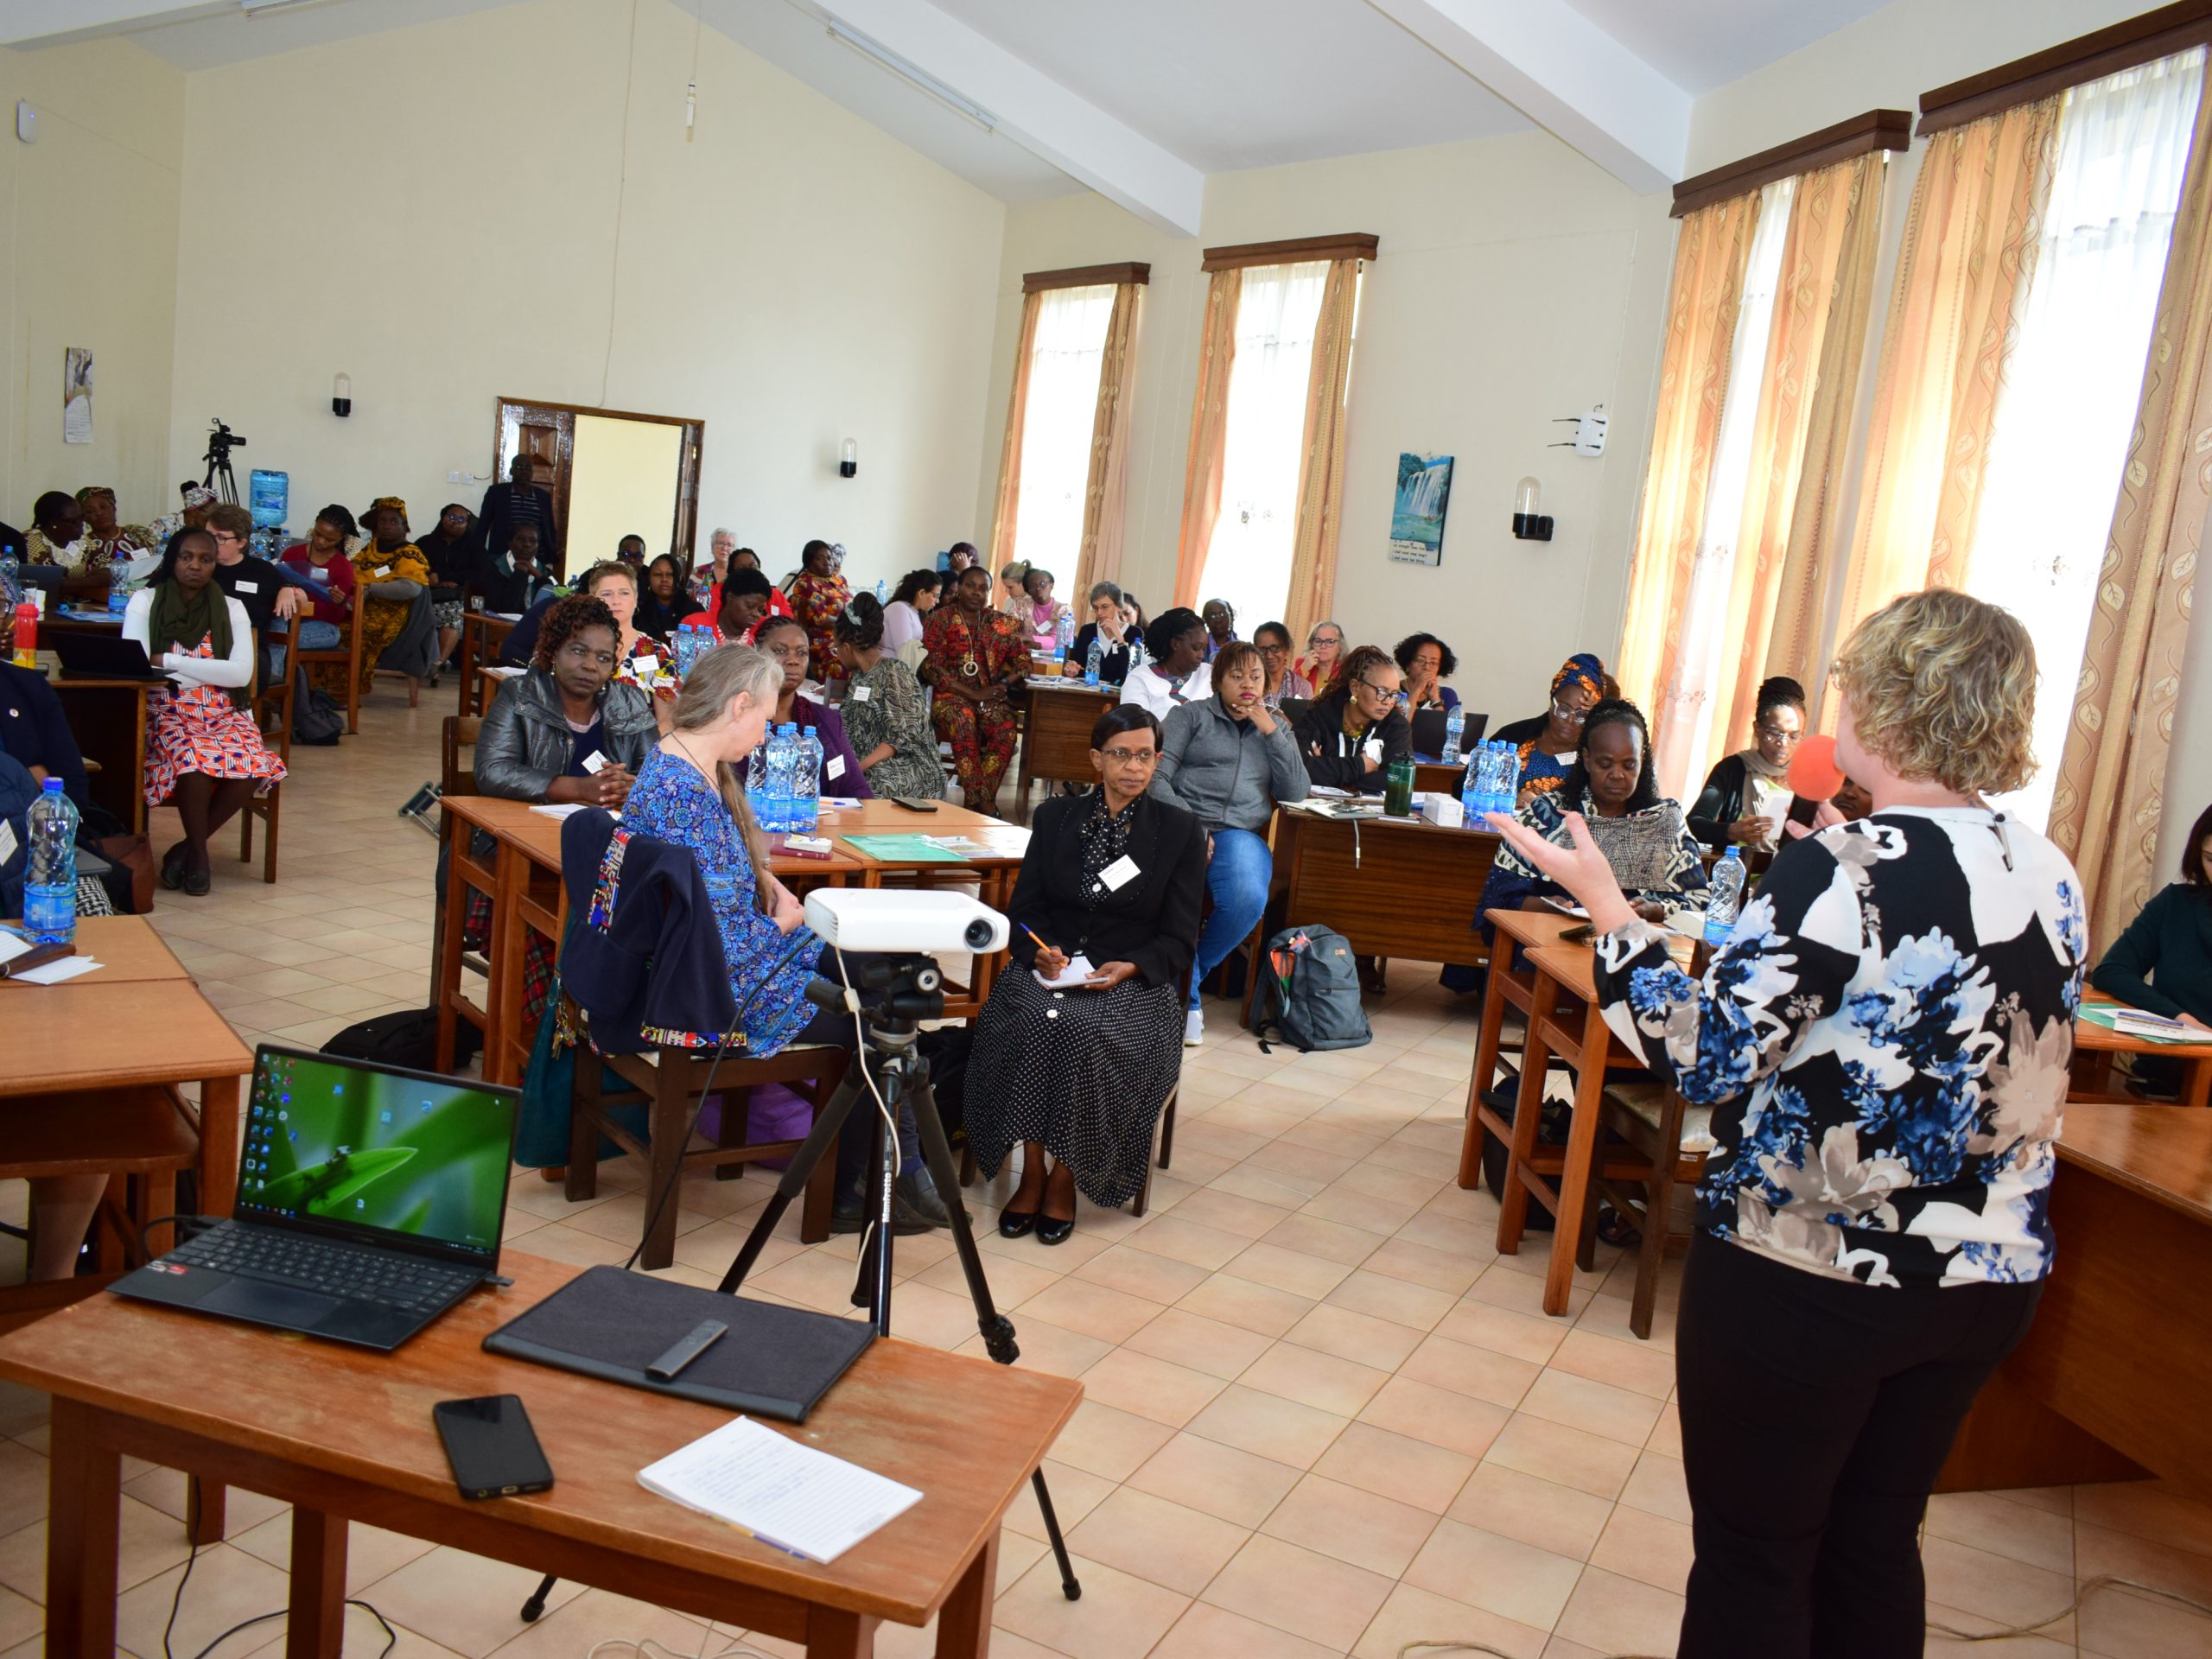 Discussion topics at the Institute for Excellence included: realities for women in leadership in Africa and forging an authentic identity as a woman in theological education